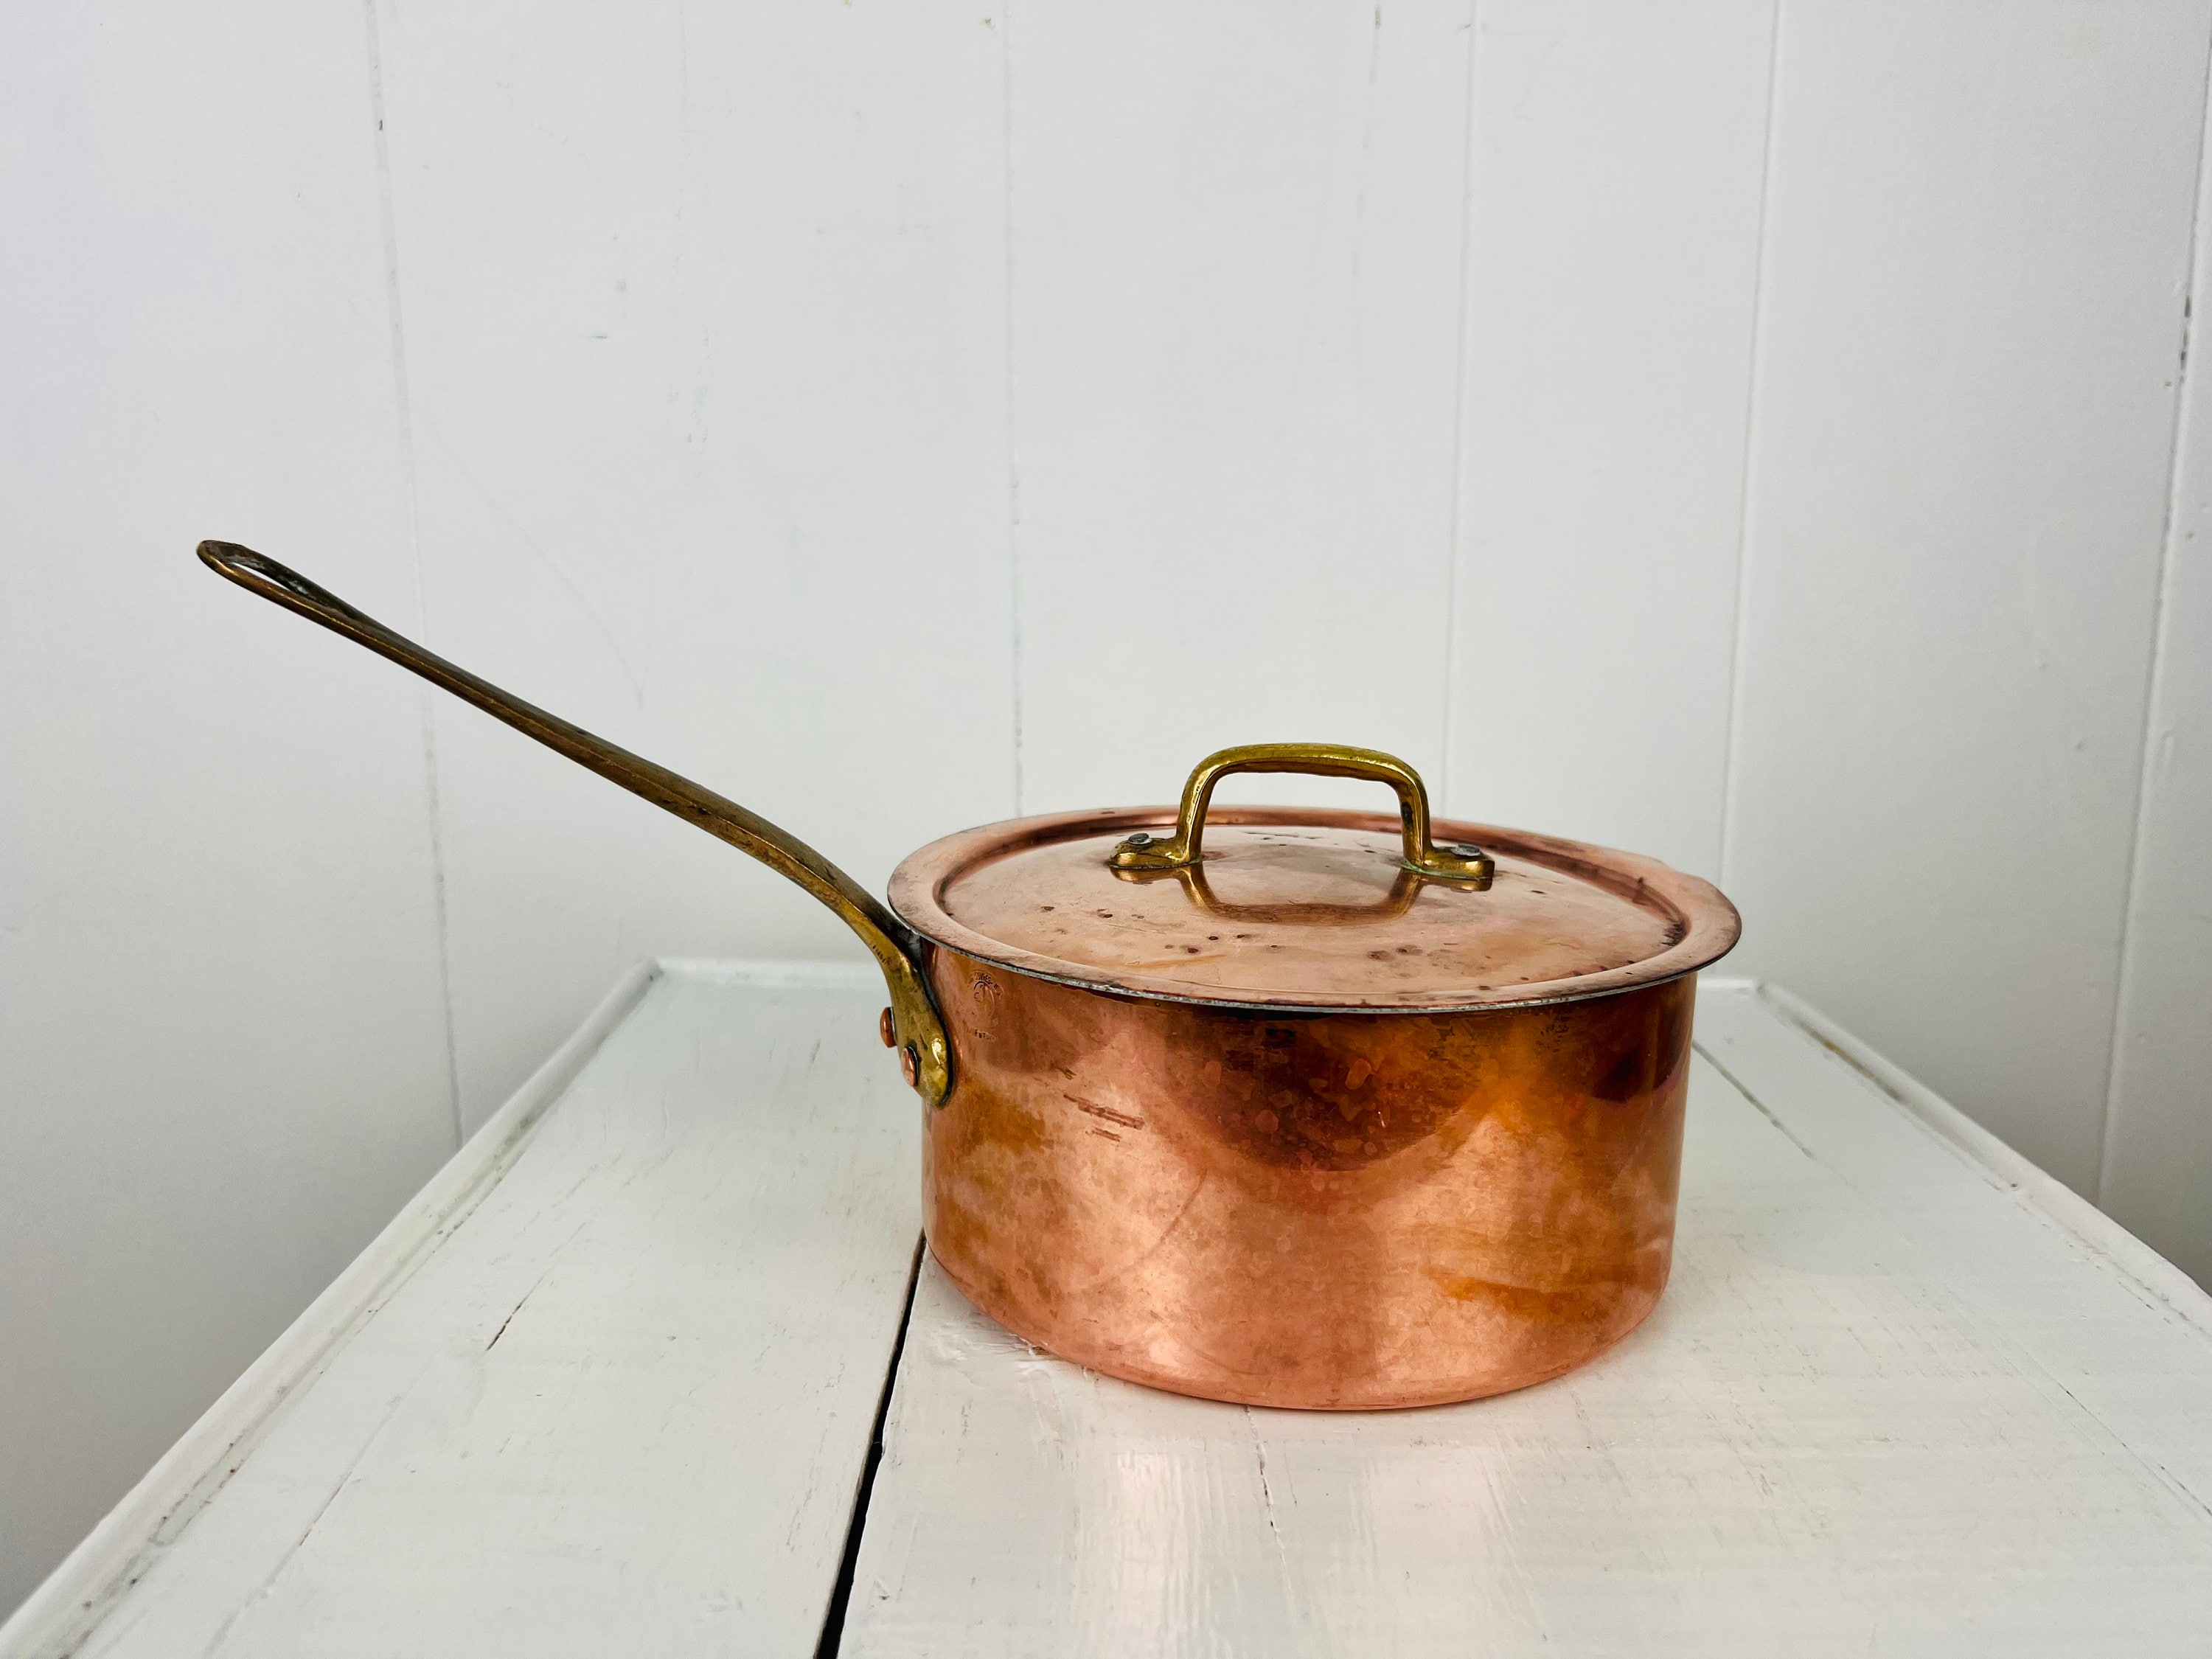 HANDMADE Pure Copper Cookware Set, Thick Double Handle Brass Handle Pot  with Lid